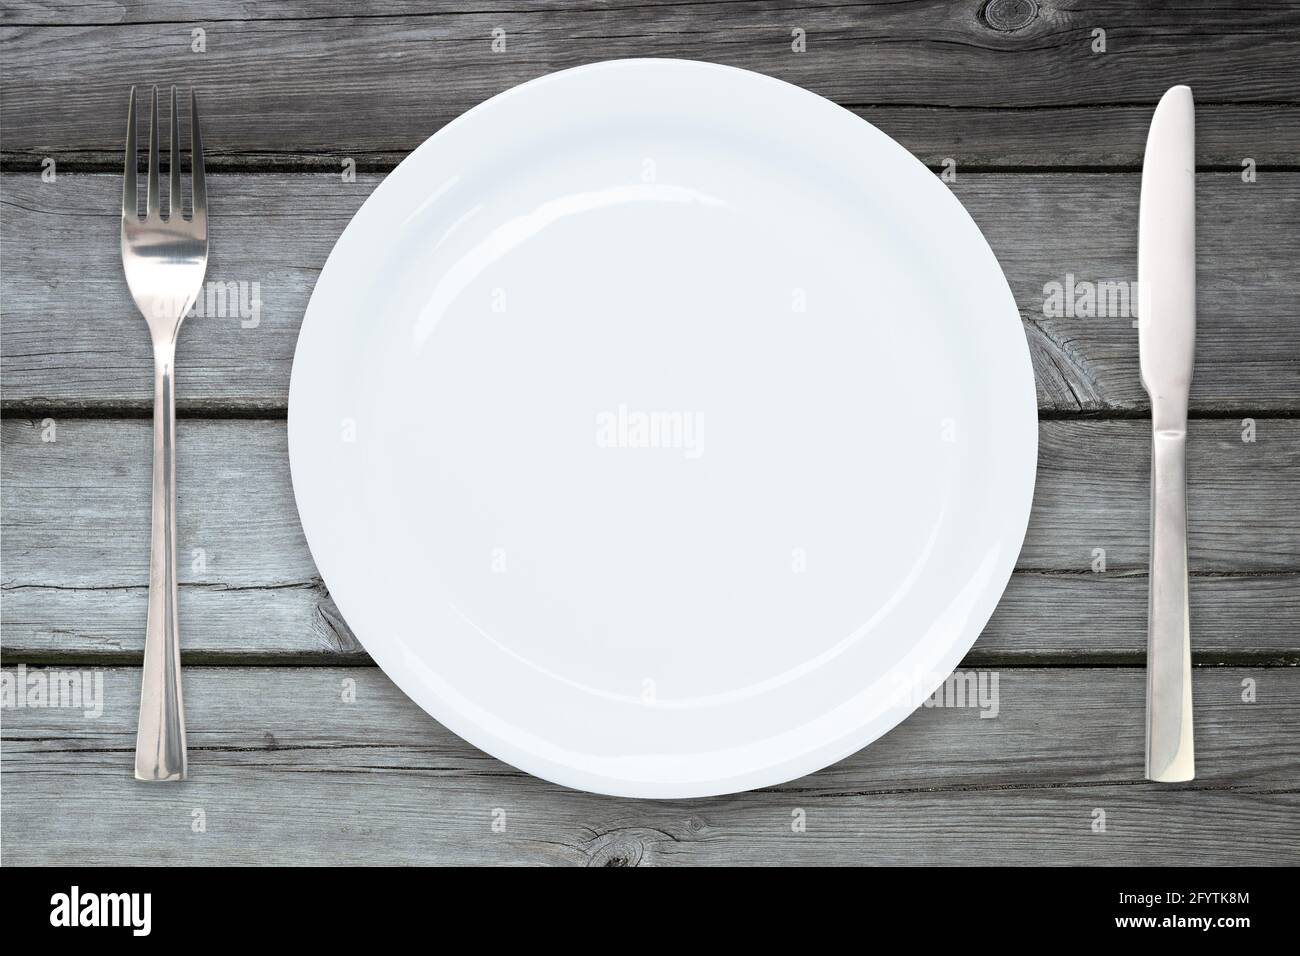 Cooking template - top view of an empty ceramic white plate with cutlery on a wooden vintage table Stock Photo